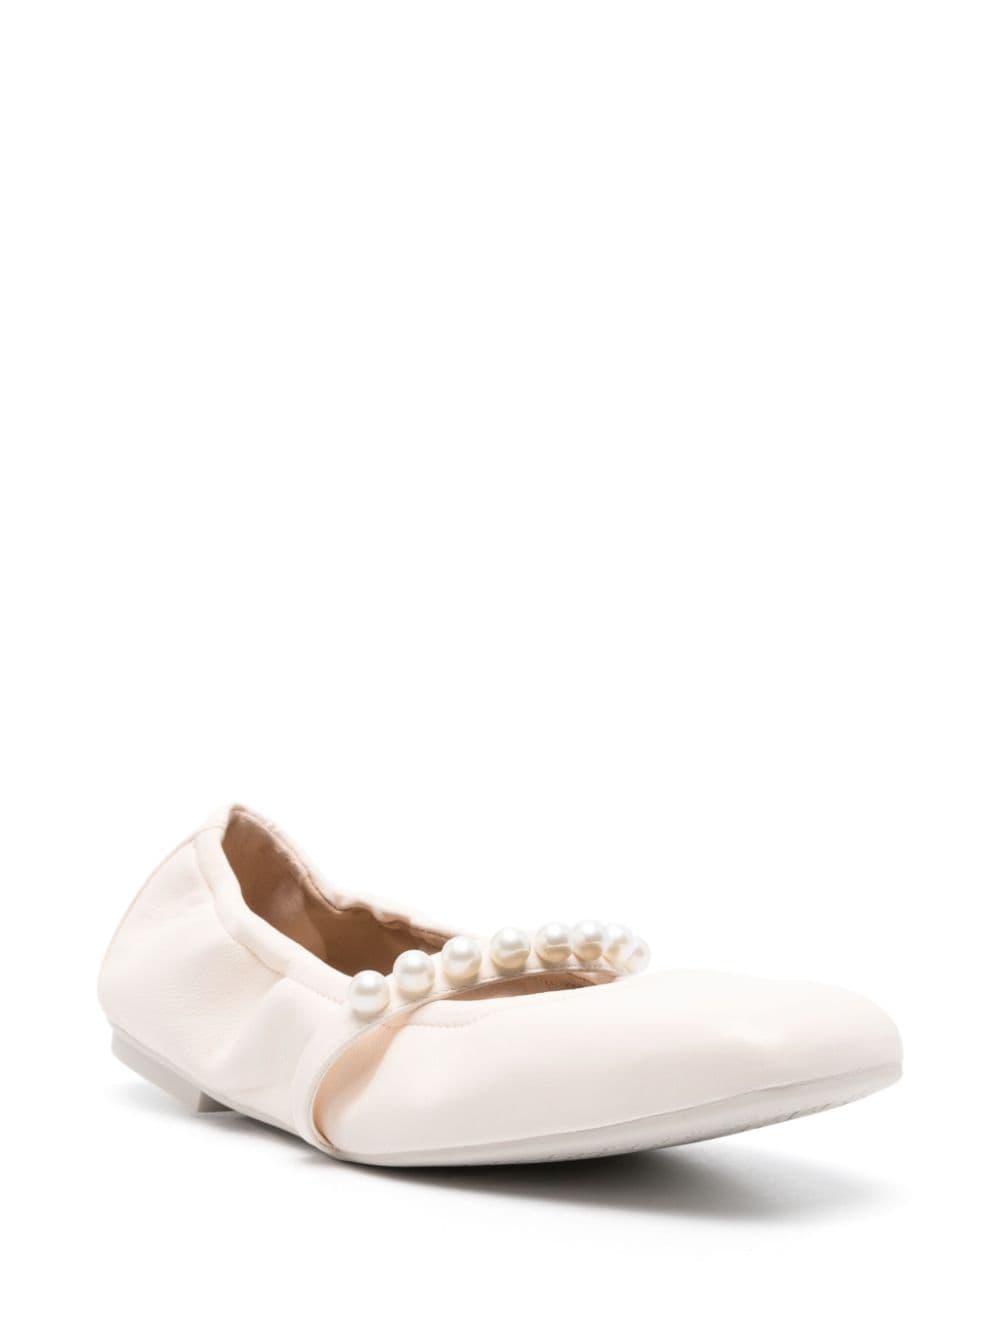 Goldie leather ballerina shoes<BR/>